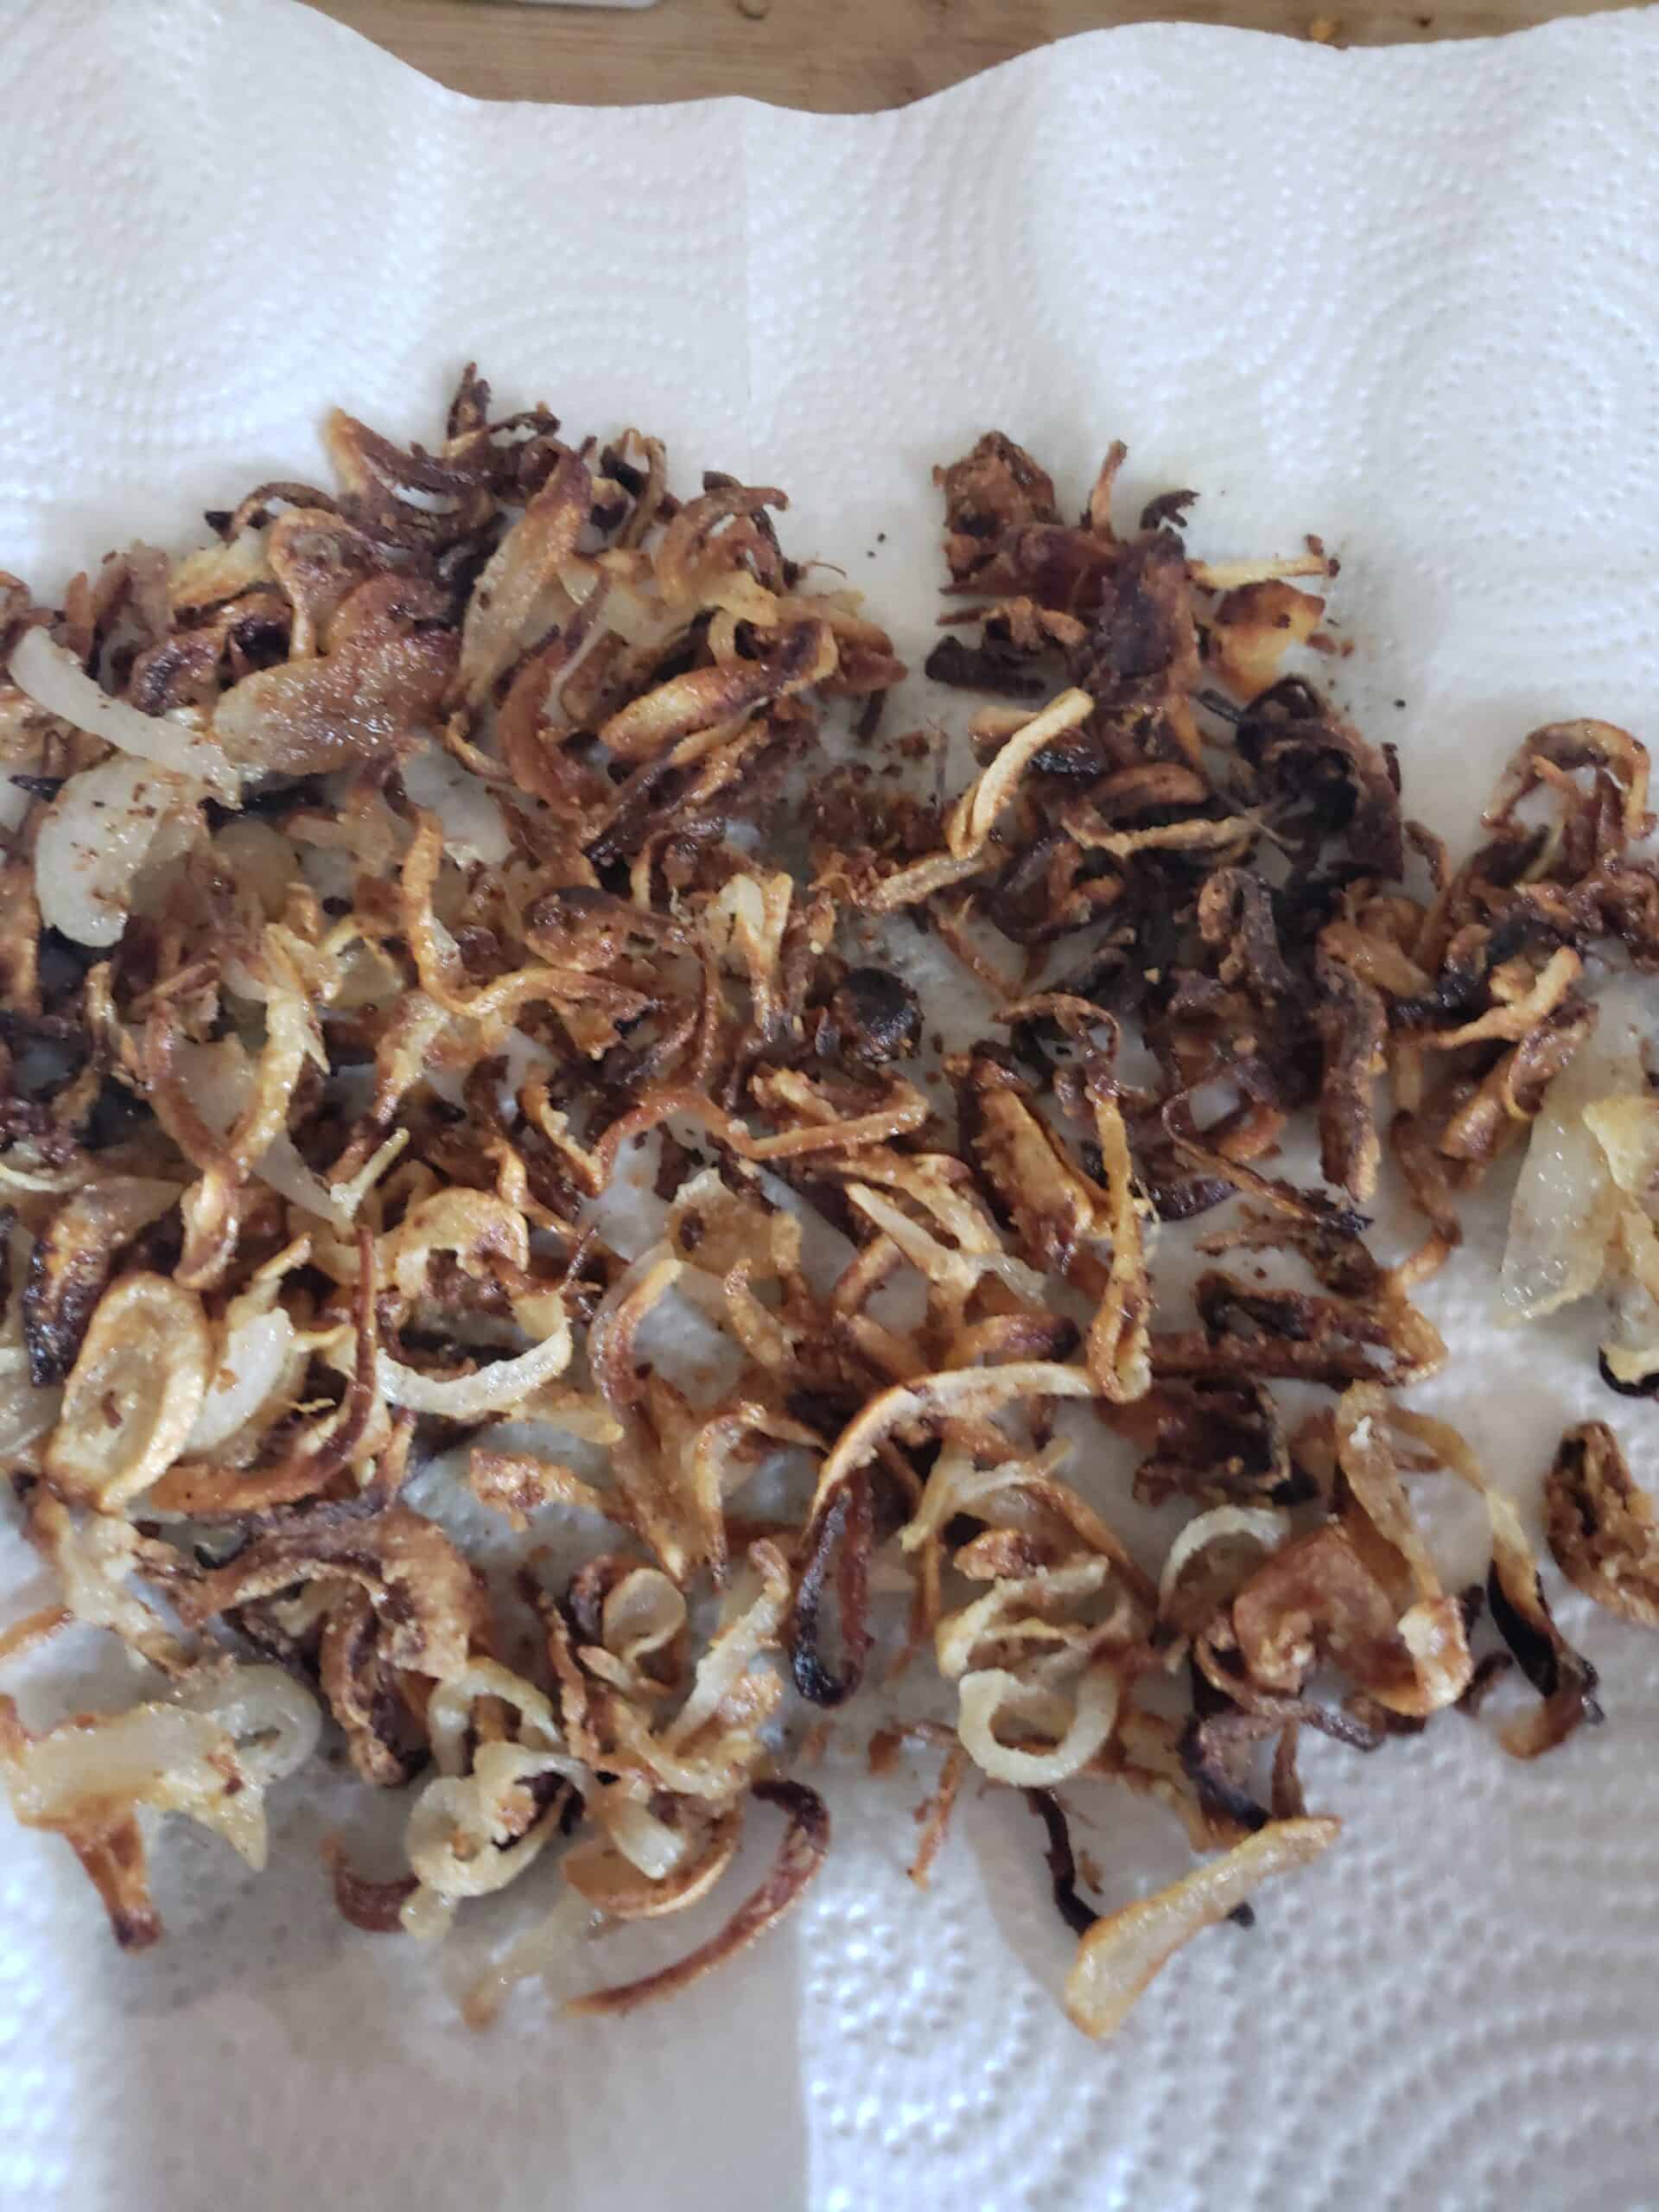 crispy fried shallots draining on a paper towel.